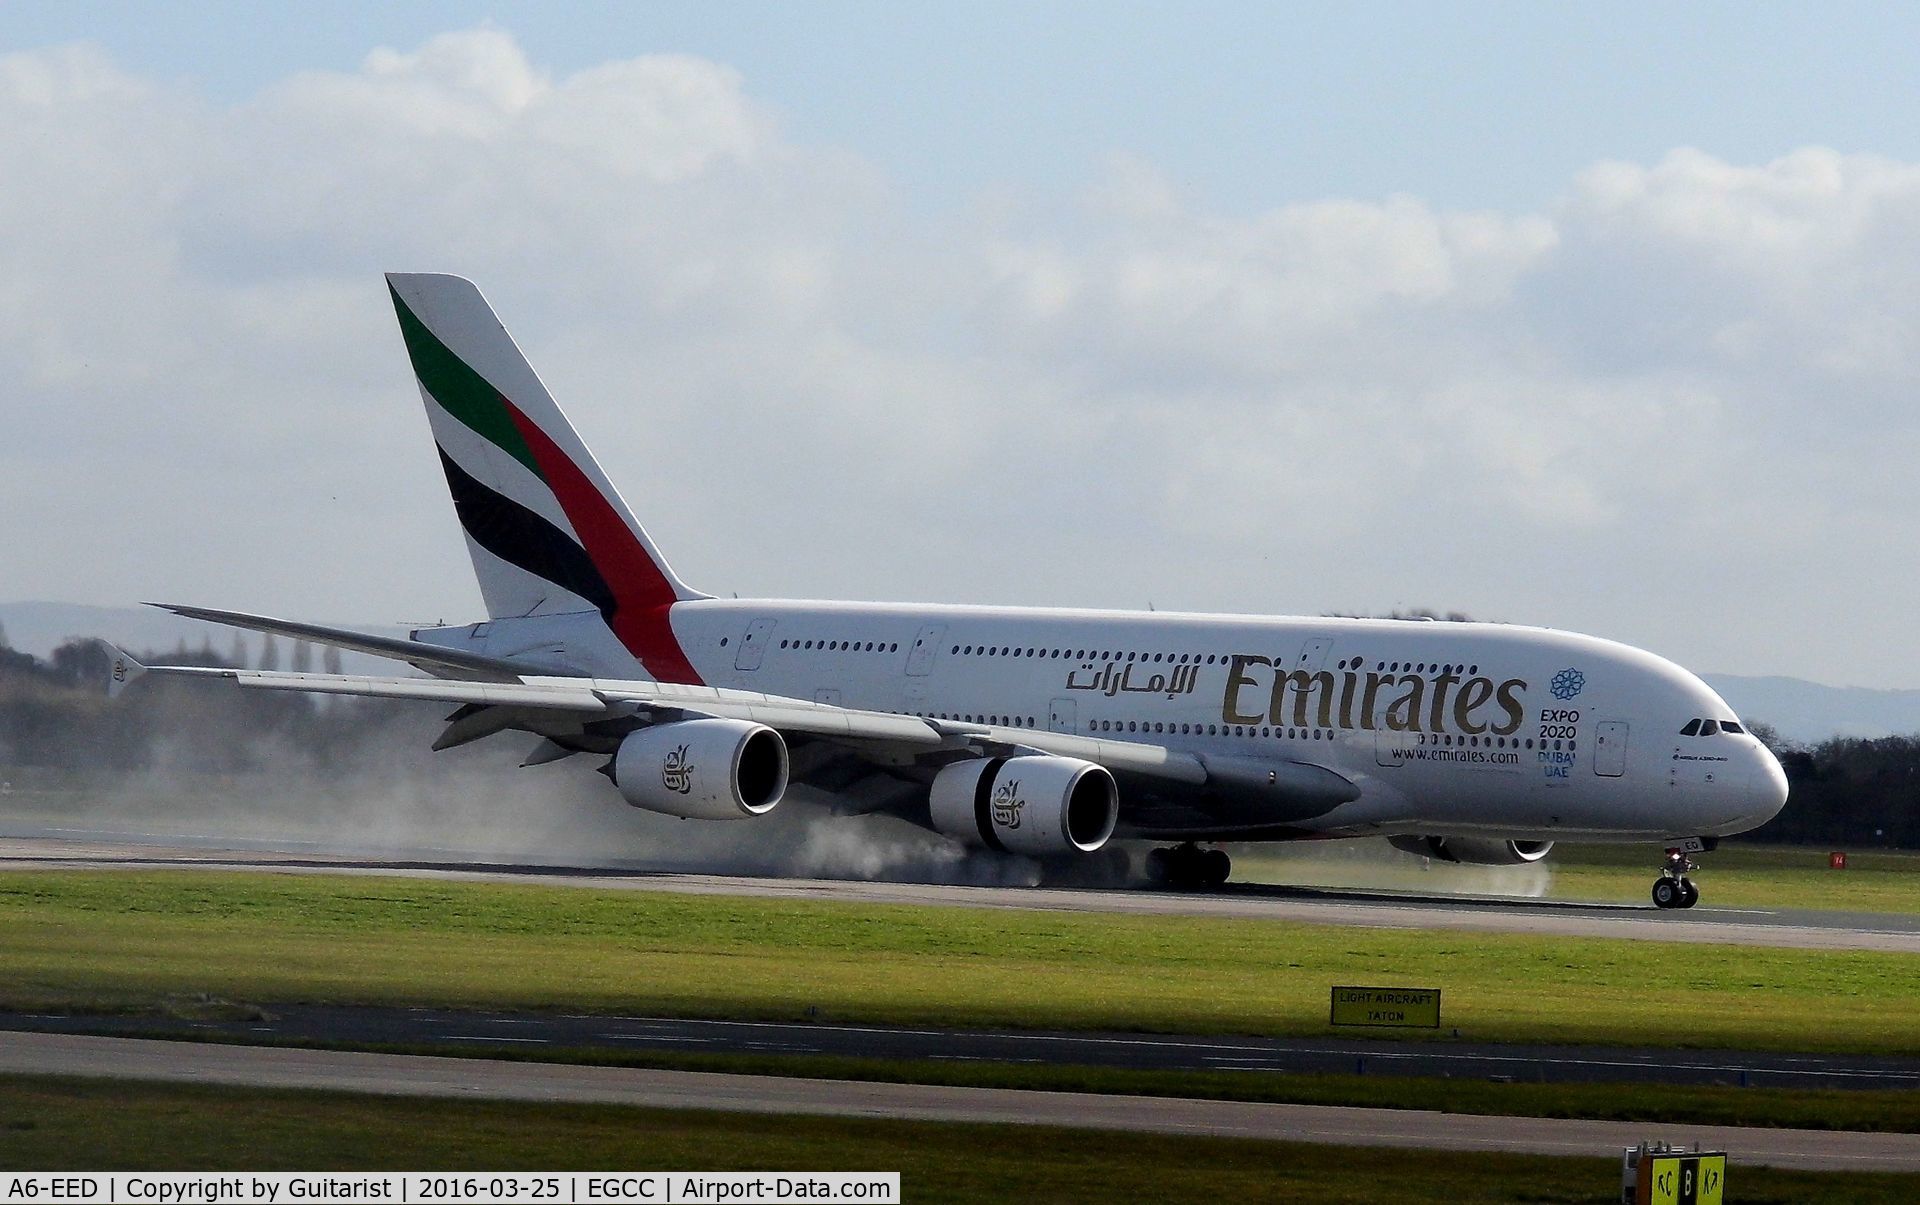 A6-EED, 2012 Airbus A380-861 C/N 111, At Manchester